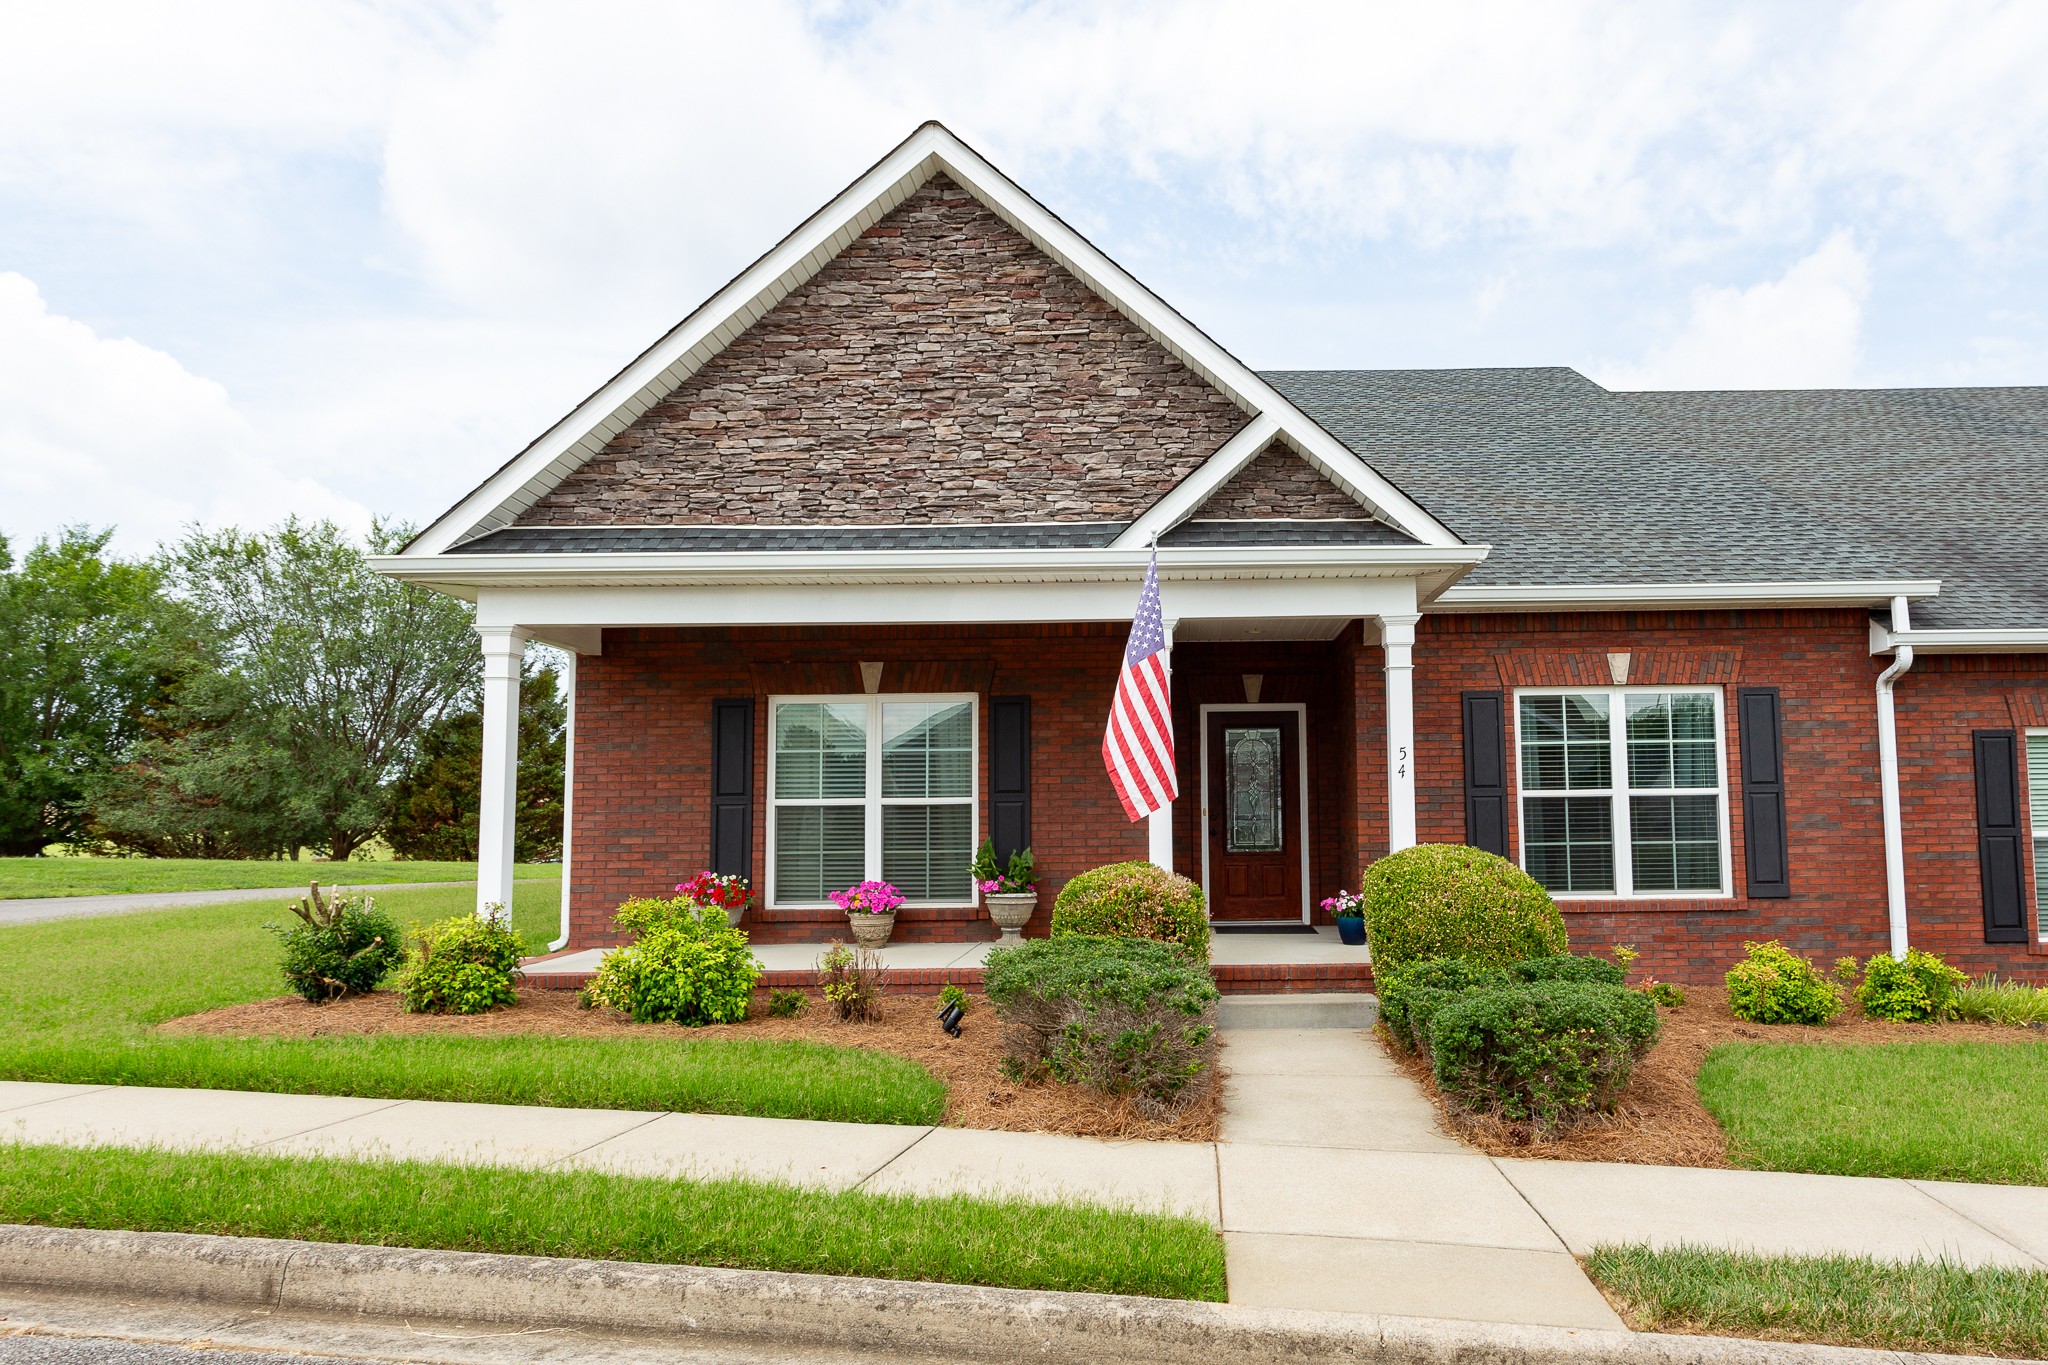 View Clarksville, TN 37043 townhome